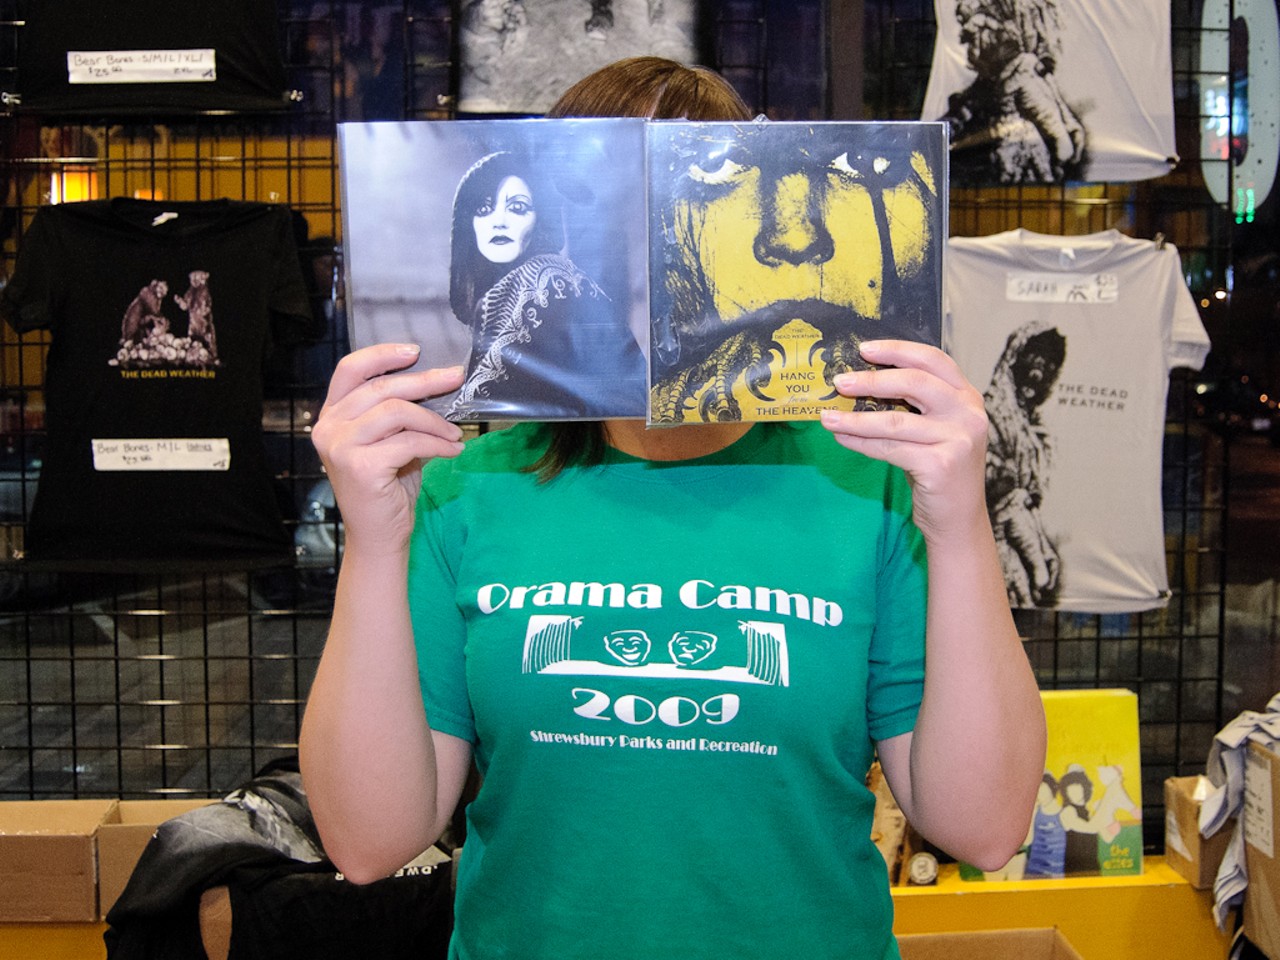 Dead Weather 45's were in hot demand, including new single "Die by the Drop."